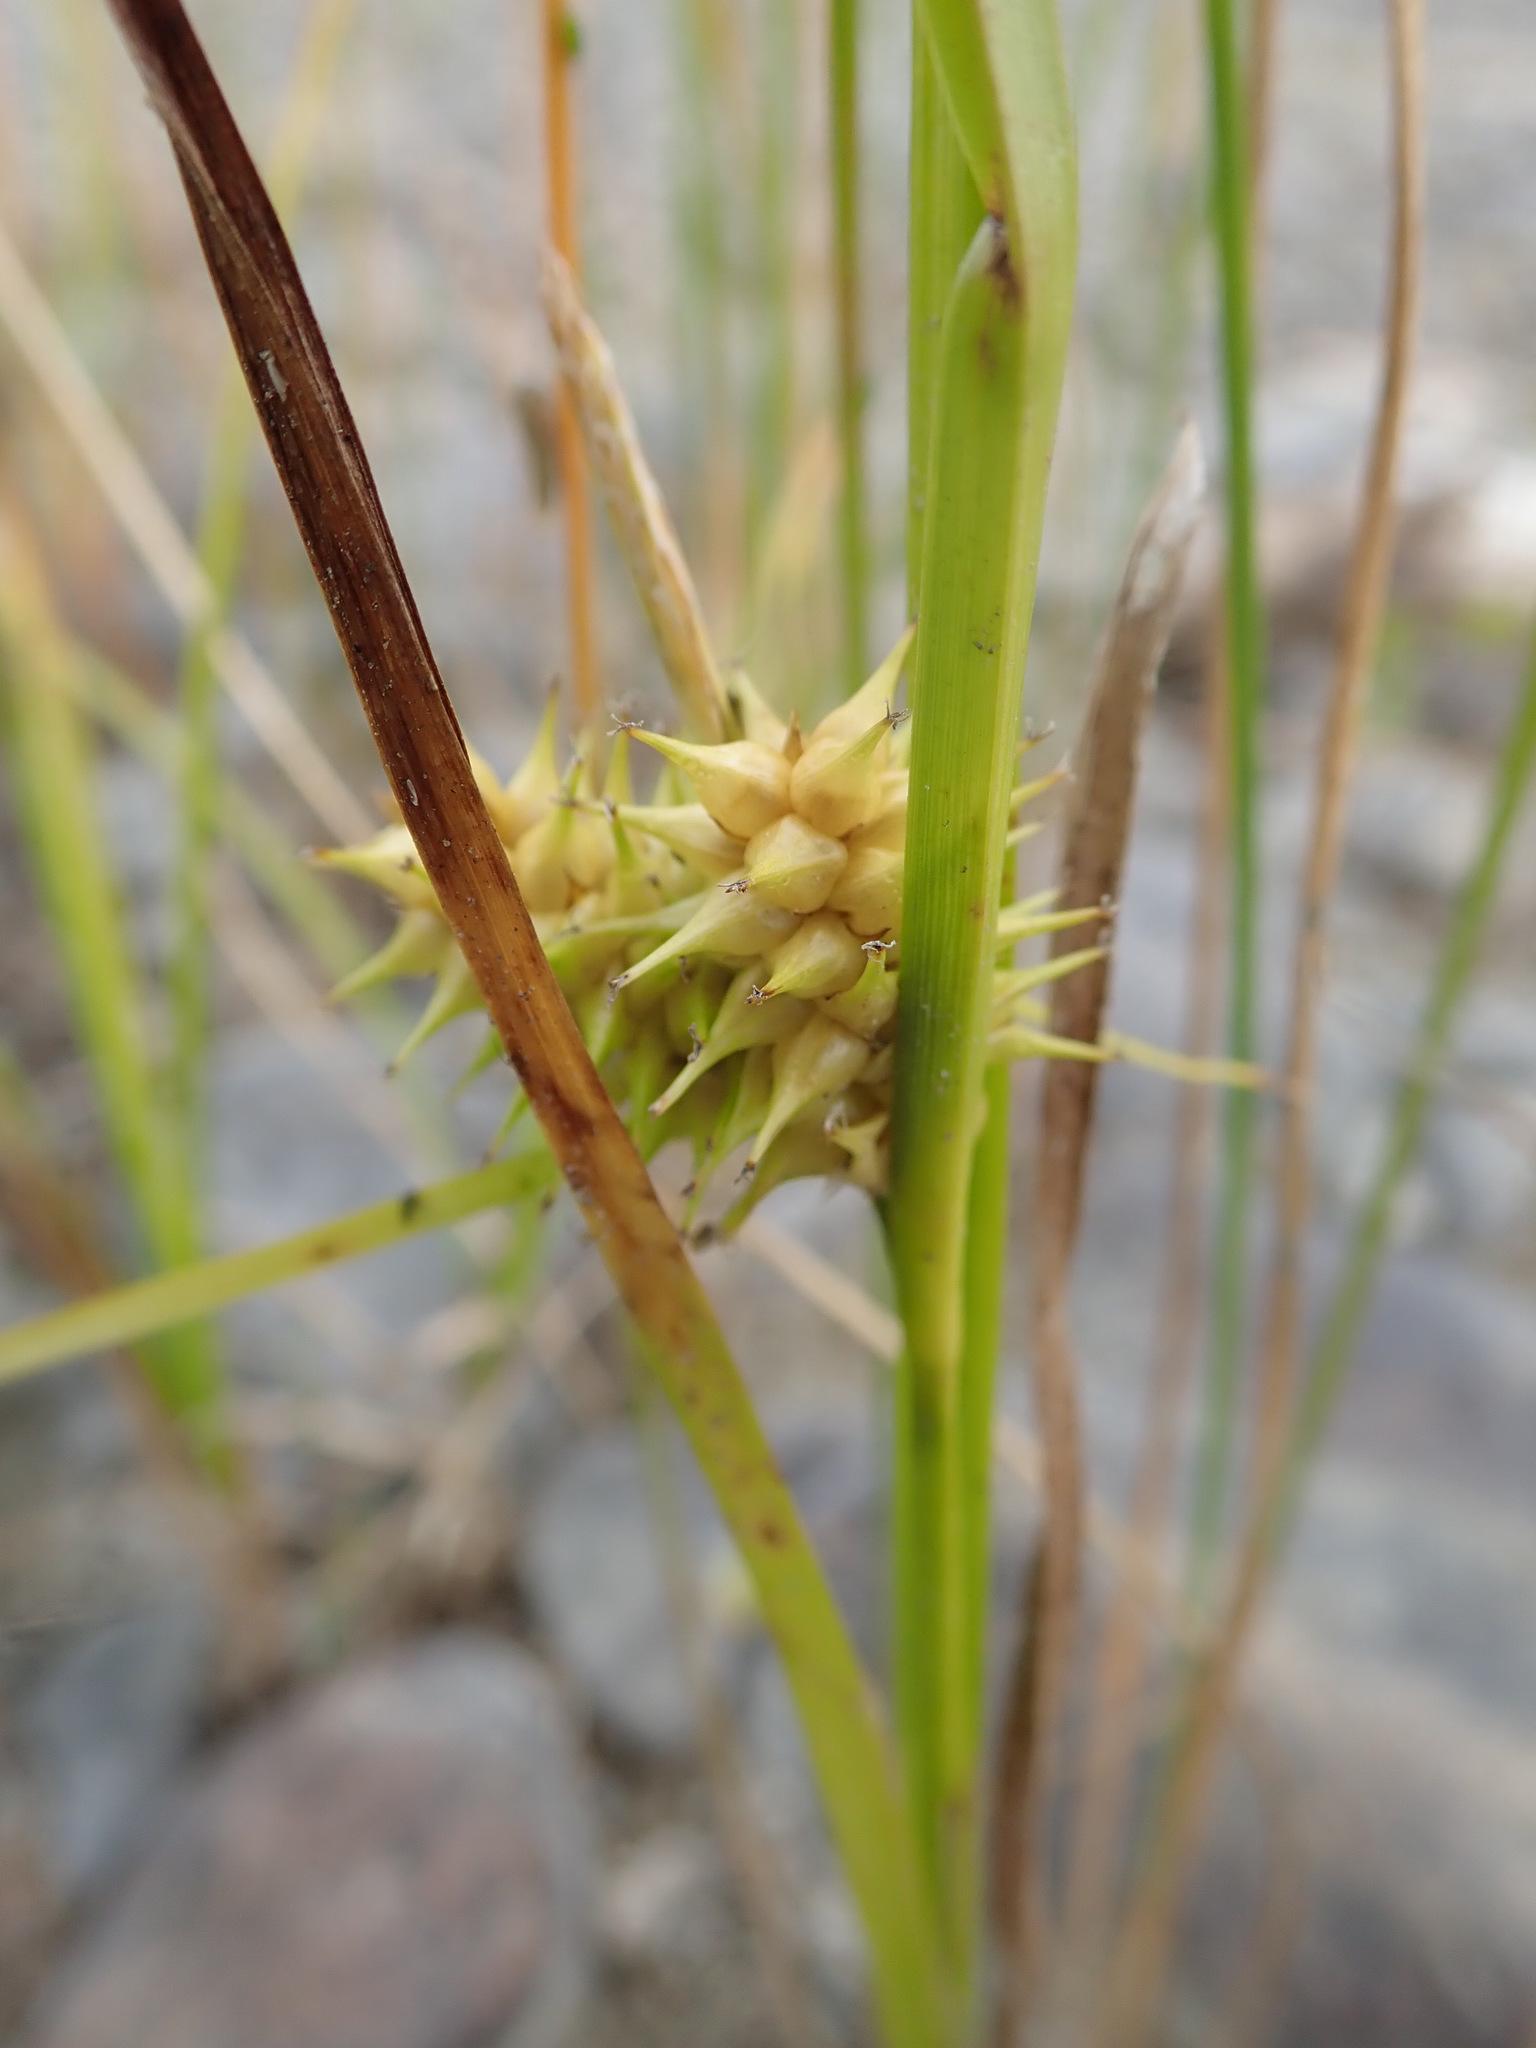 lime-yellow spikelets with lime-brown foliage and stems